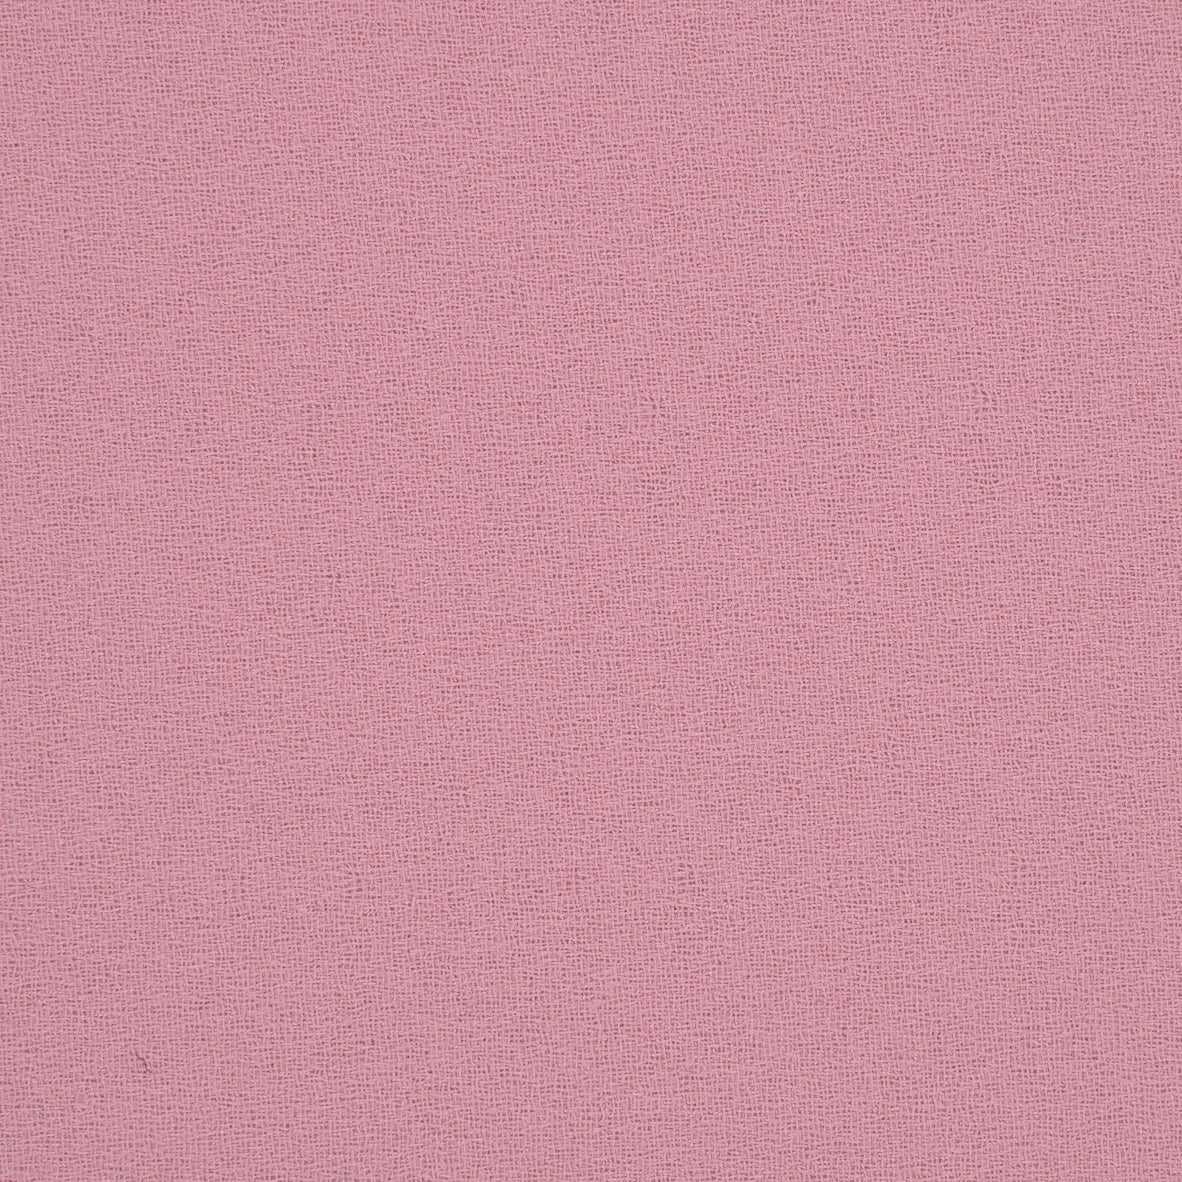 35001-15 Shrimp Crepe Plain Dyed Blend 315g/yd 54&quot; crepe pink plain dyed polyester woven Solid Color - knit fabric - woven fabric - fabric company - fabric wholesale - fabric b2b - fabric factory - high quality fabric - hong kong fabric - fabric hk - acetate fabric - cotton fabric - linen fabric - metallic fabric - nylon fabric - polyester fabric - spandex fabric - chun wing hing - cwh hk - fabric worldwide ship - 針織布 - 梳織布 - 布料公司- 布料批發 - 香港布料 - 秦榮興